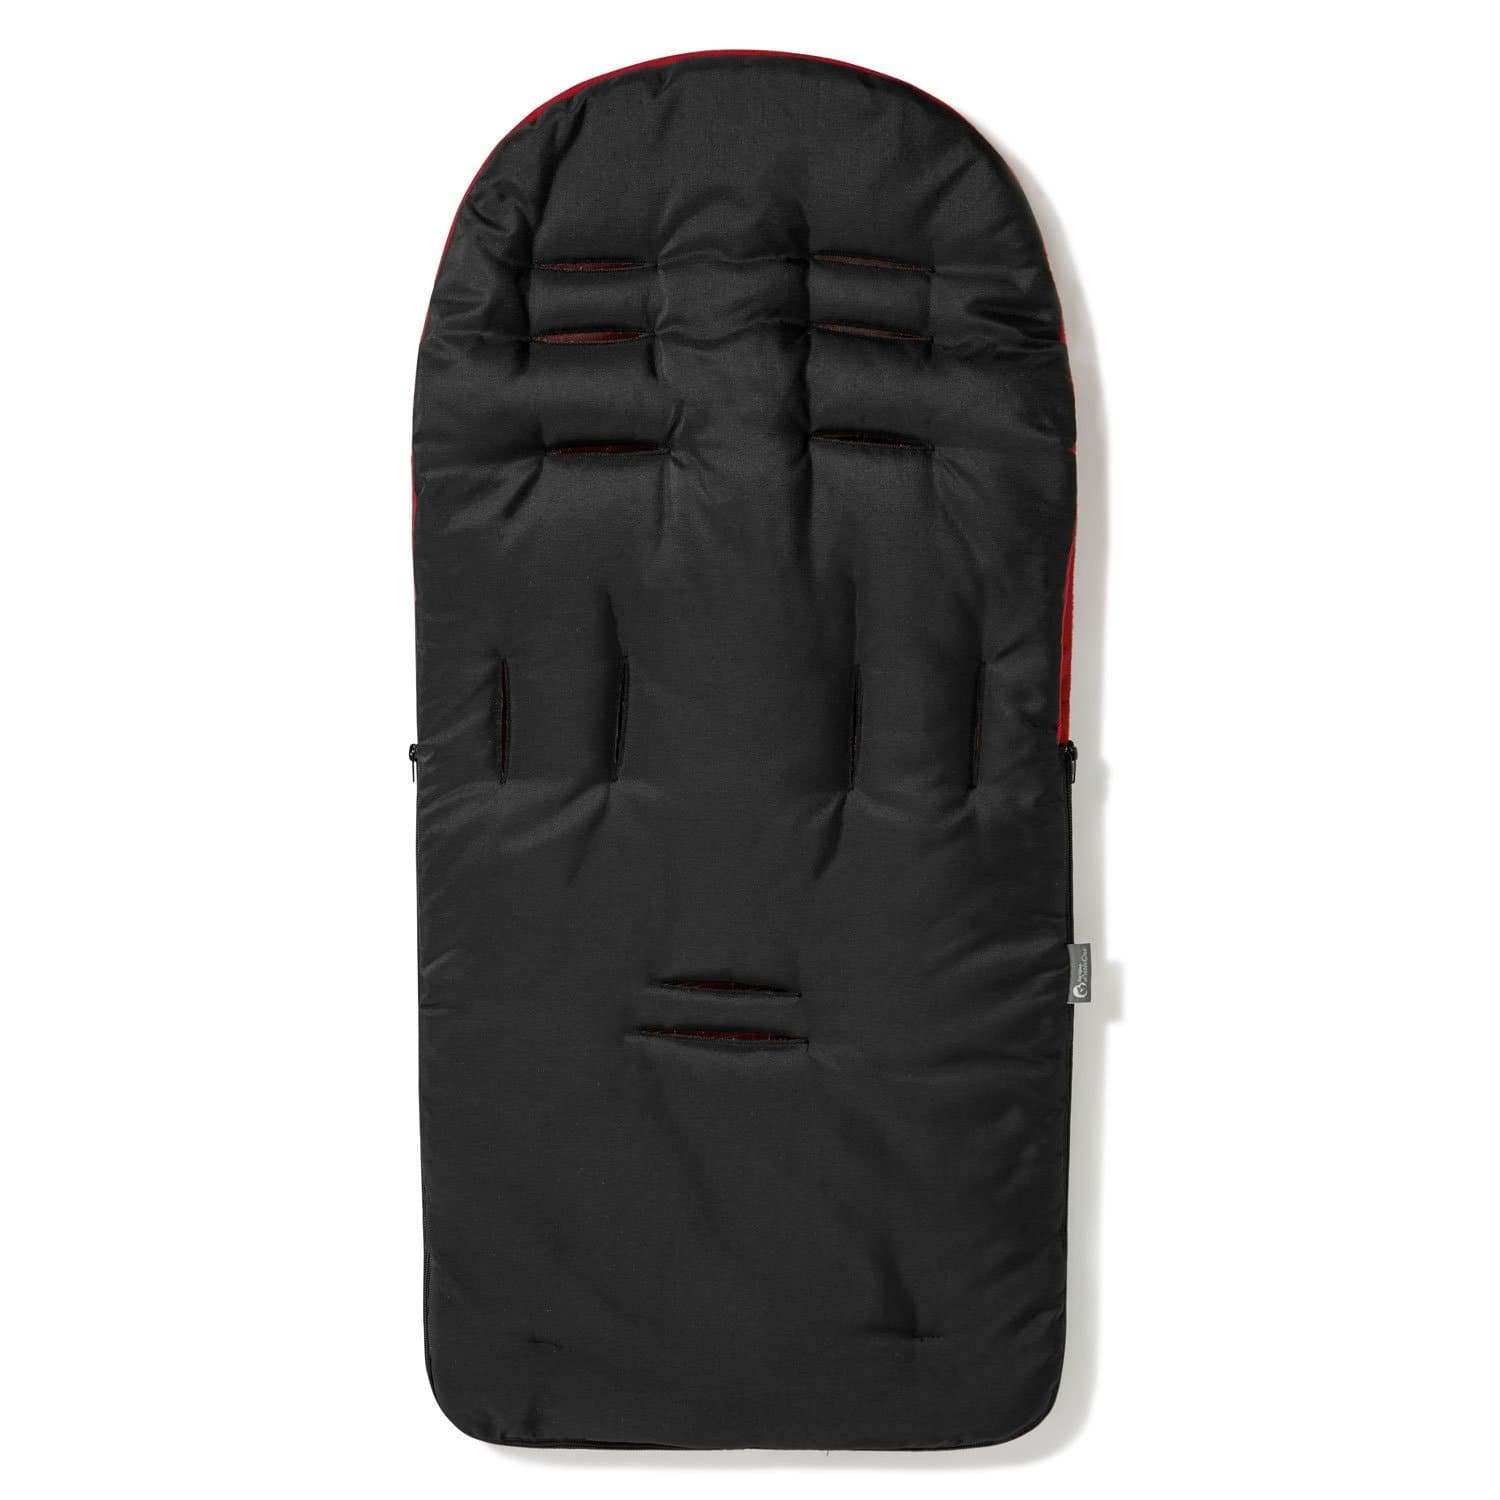 Premium Footmuff / Cosy Toes Compatible with Red Kite - For Your Little One